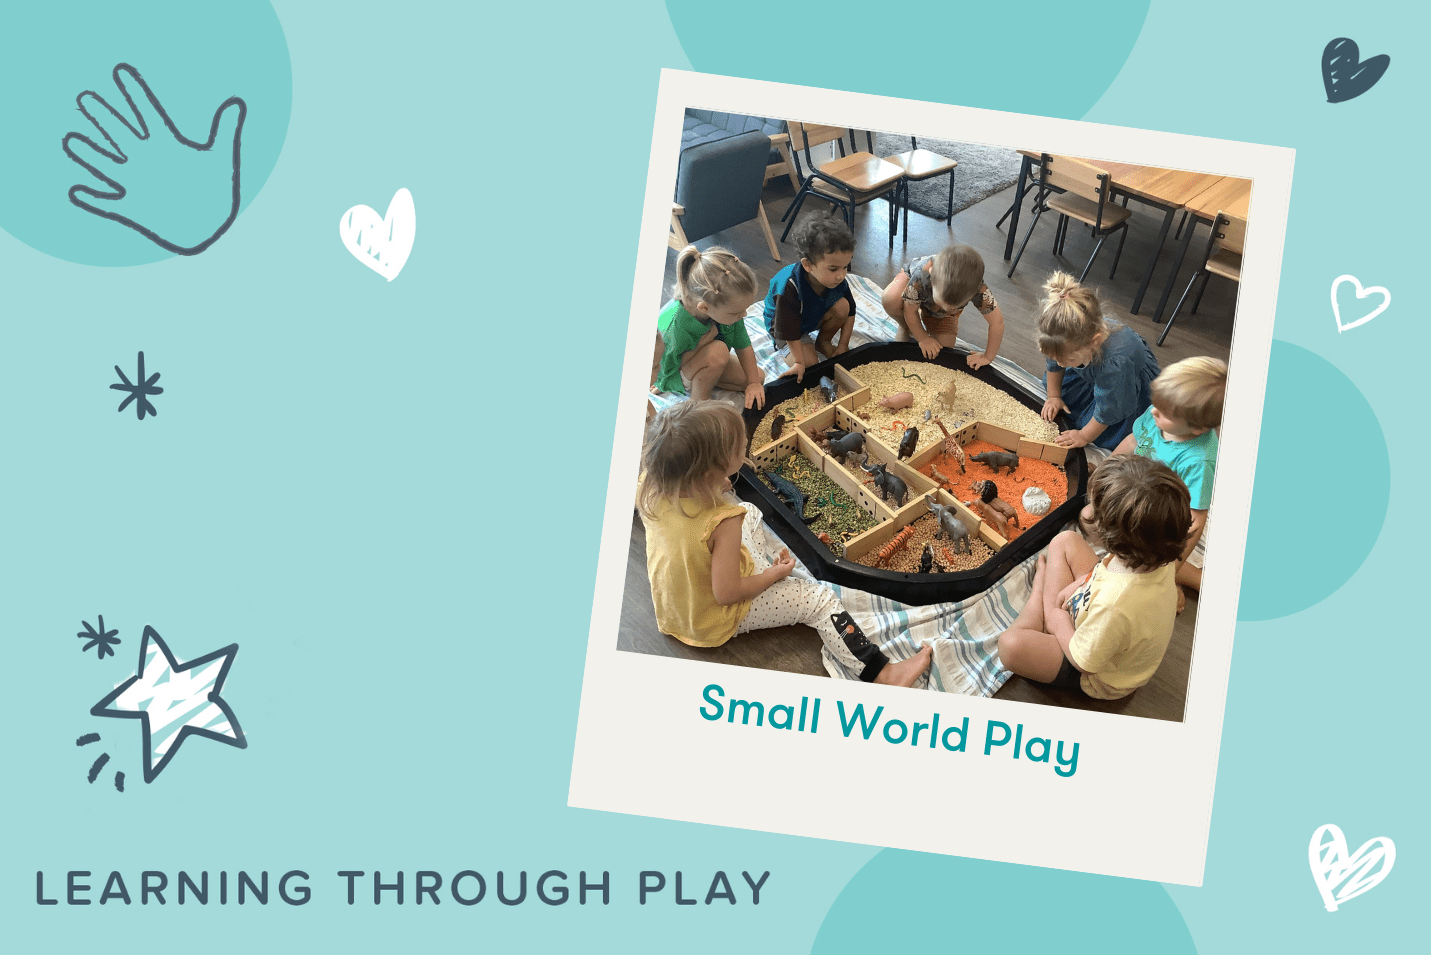 Learning Through Play: Small World Play